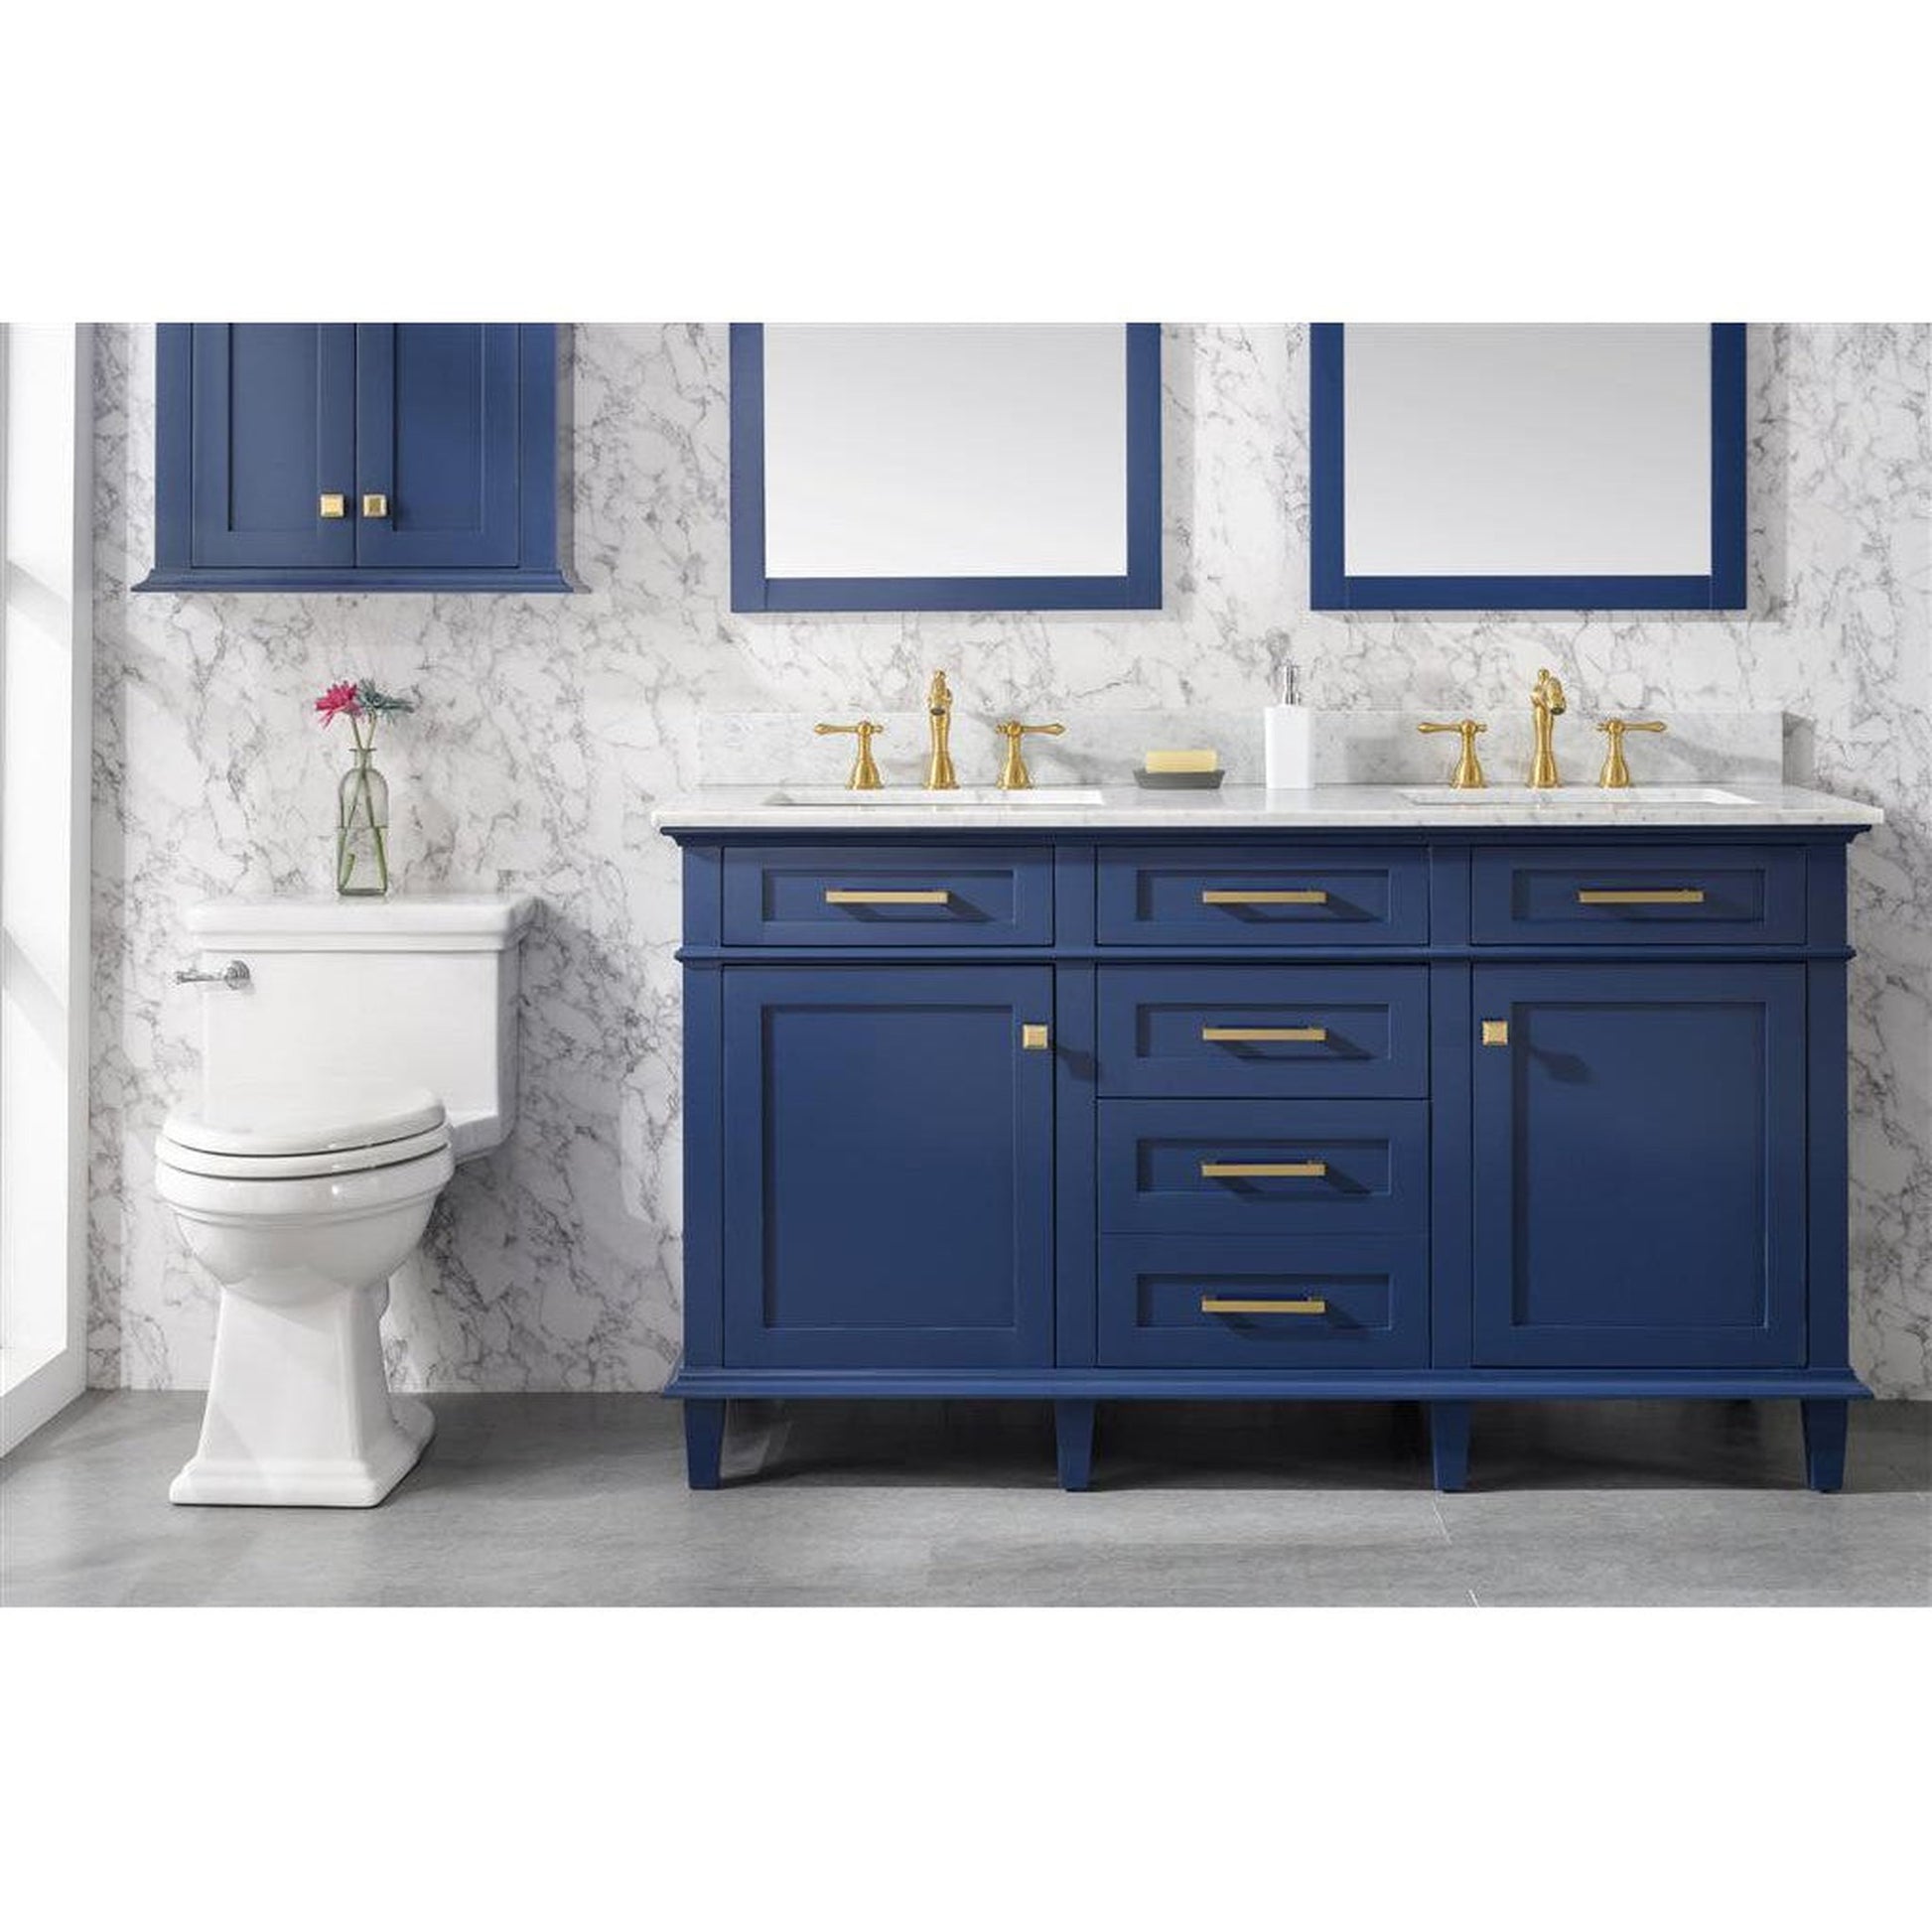 Legion Furniture WLF2260D 60" Blue Freestanding Vanity With White Carrara Marble Top and Double White Ceramic Sink